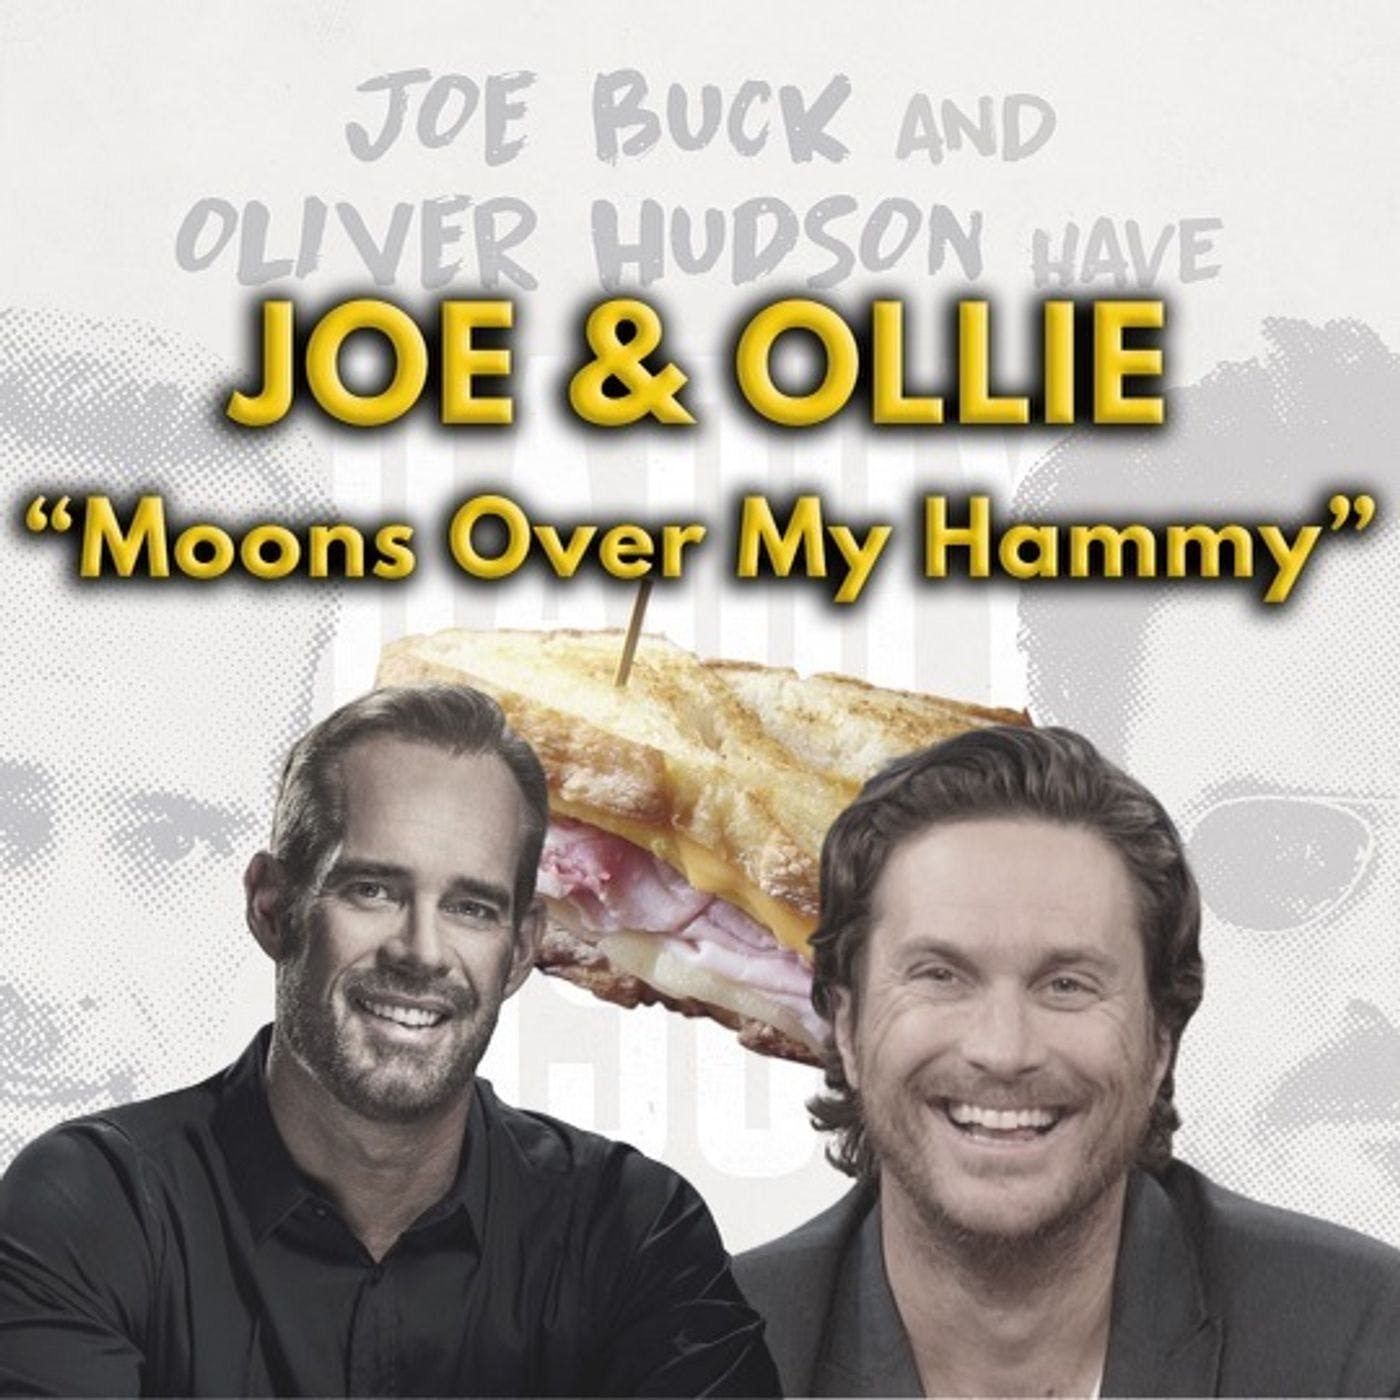 Joe and Oliver: Moons Over My Hammy